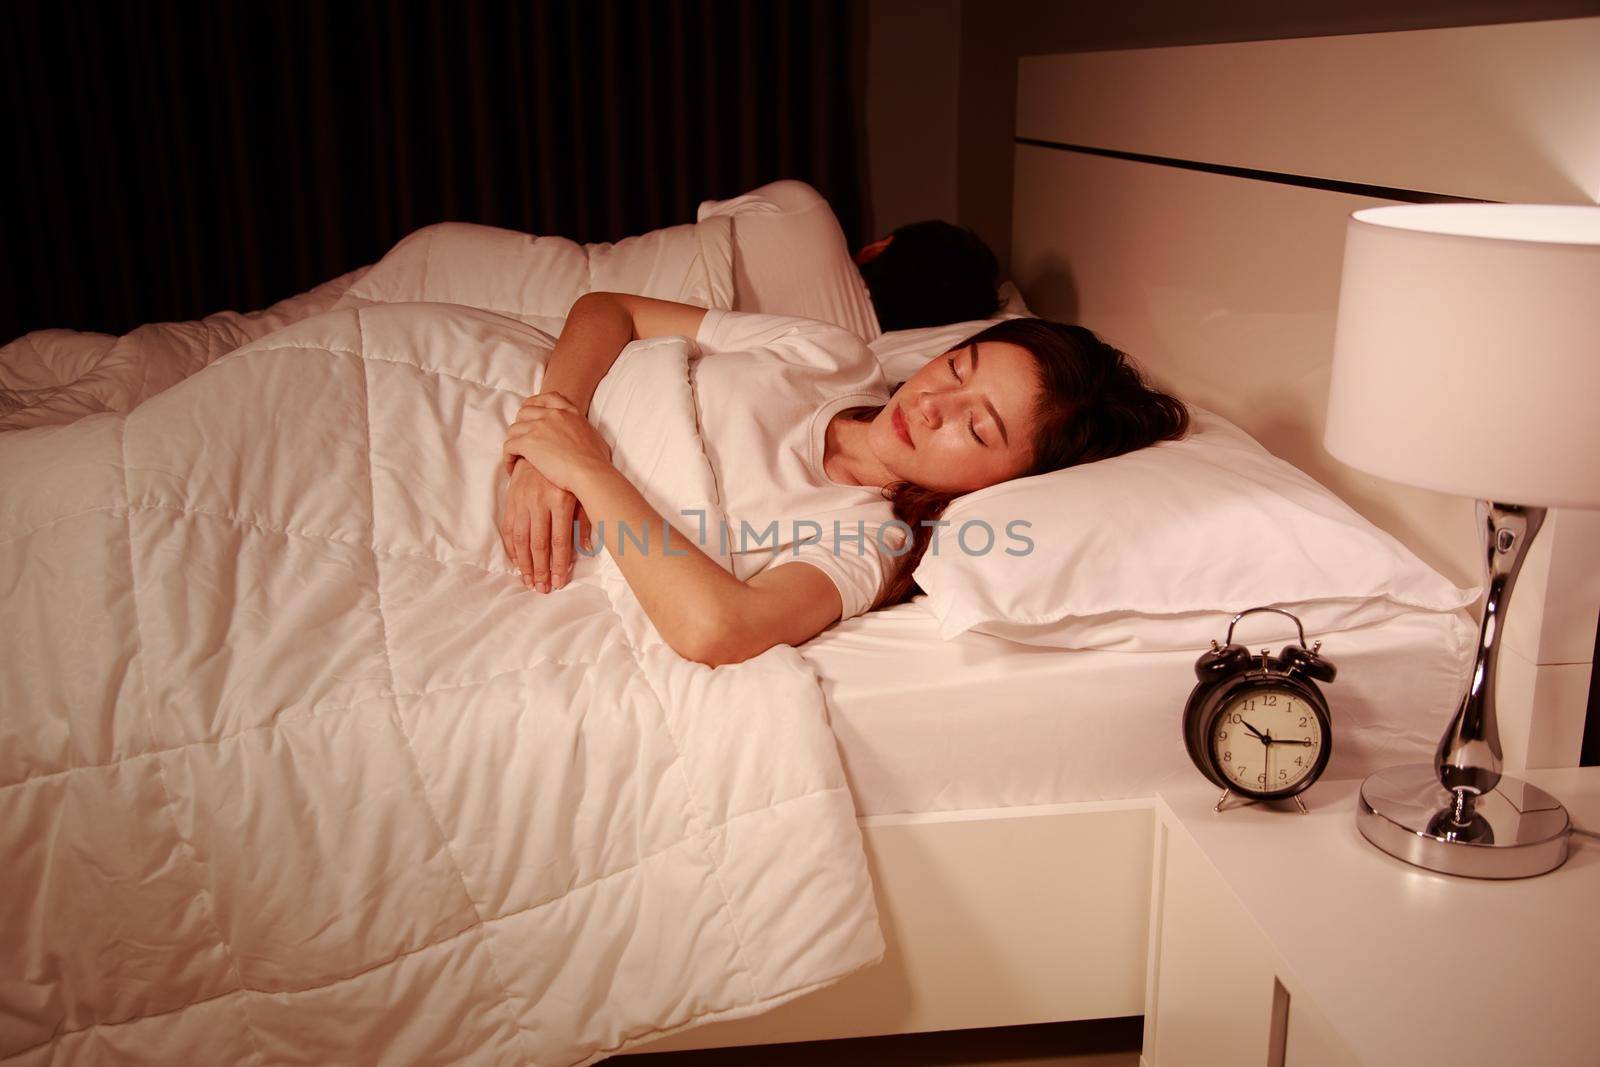 couple sleeping on a comfortable bed in bedroom at night by geargodz